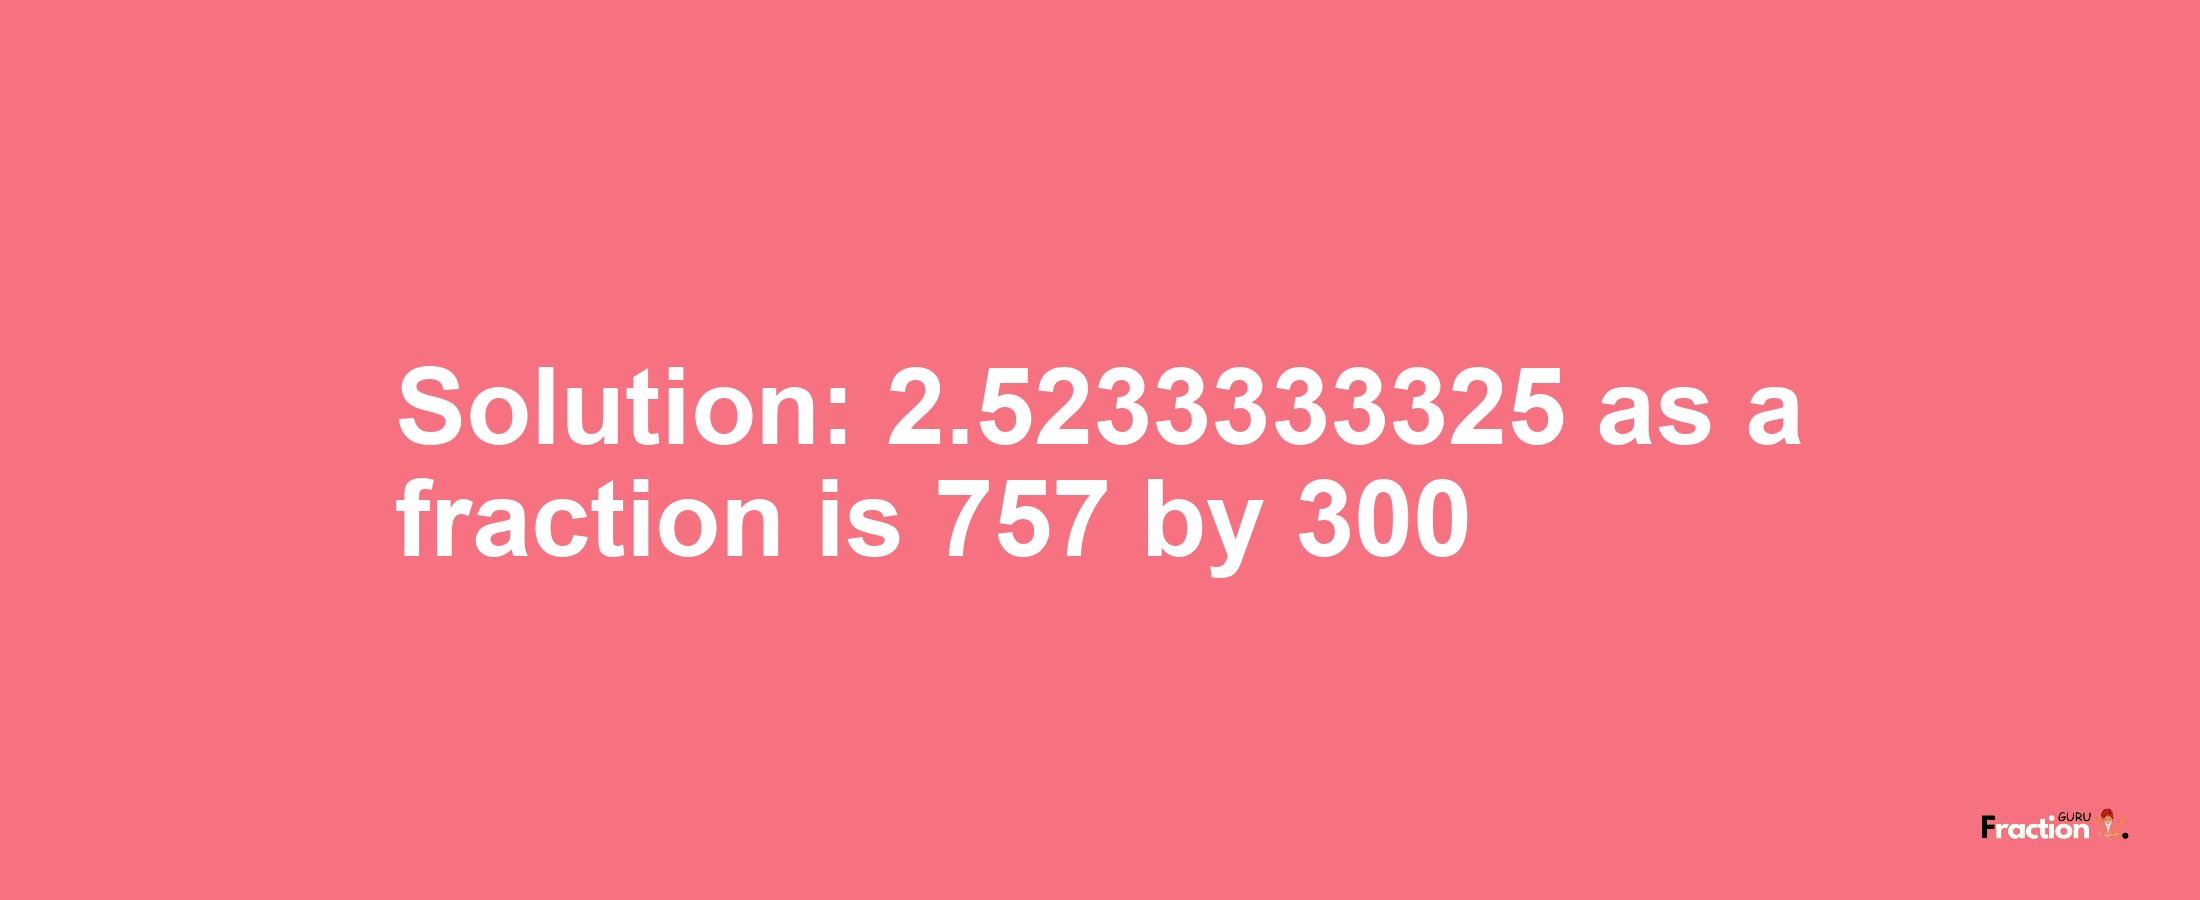 Solution:2.5233333325 as a fraction is 757/300